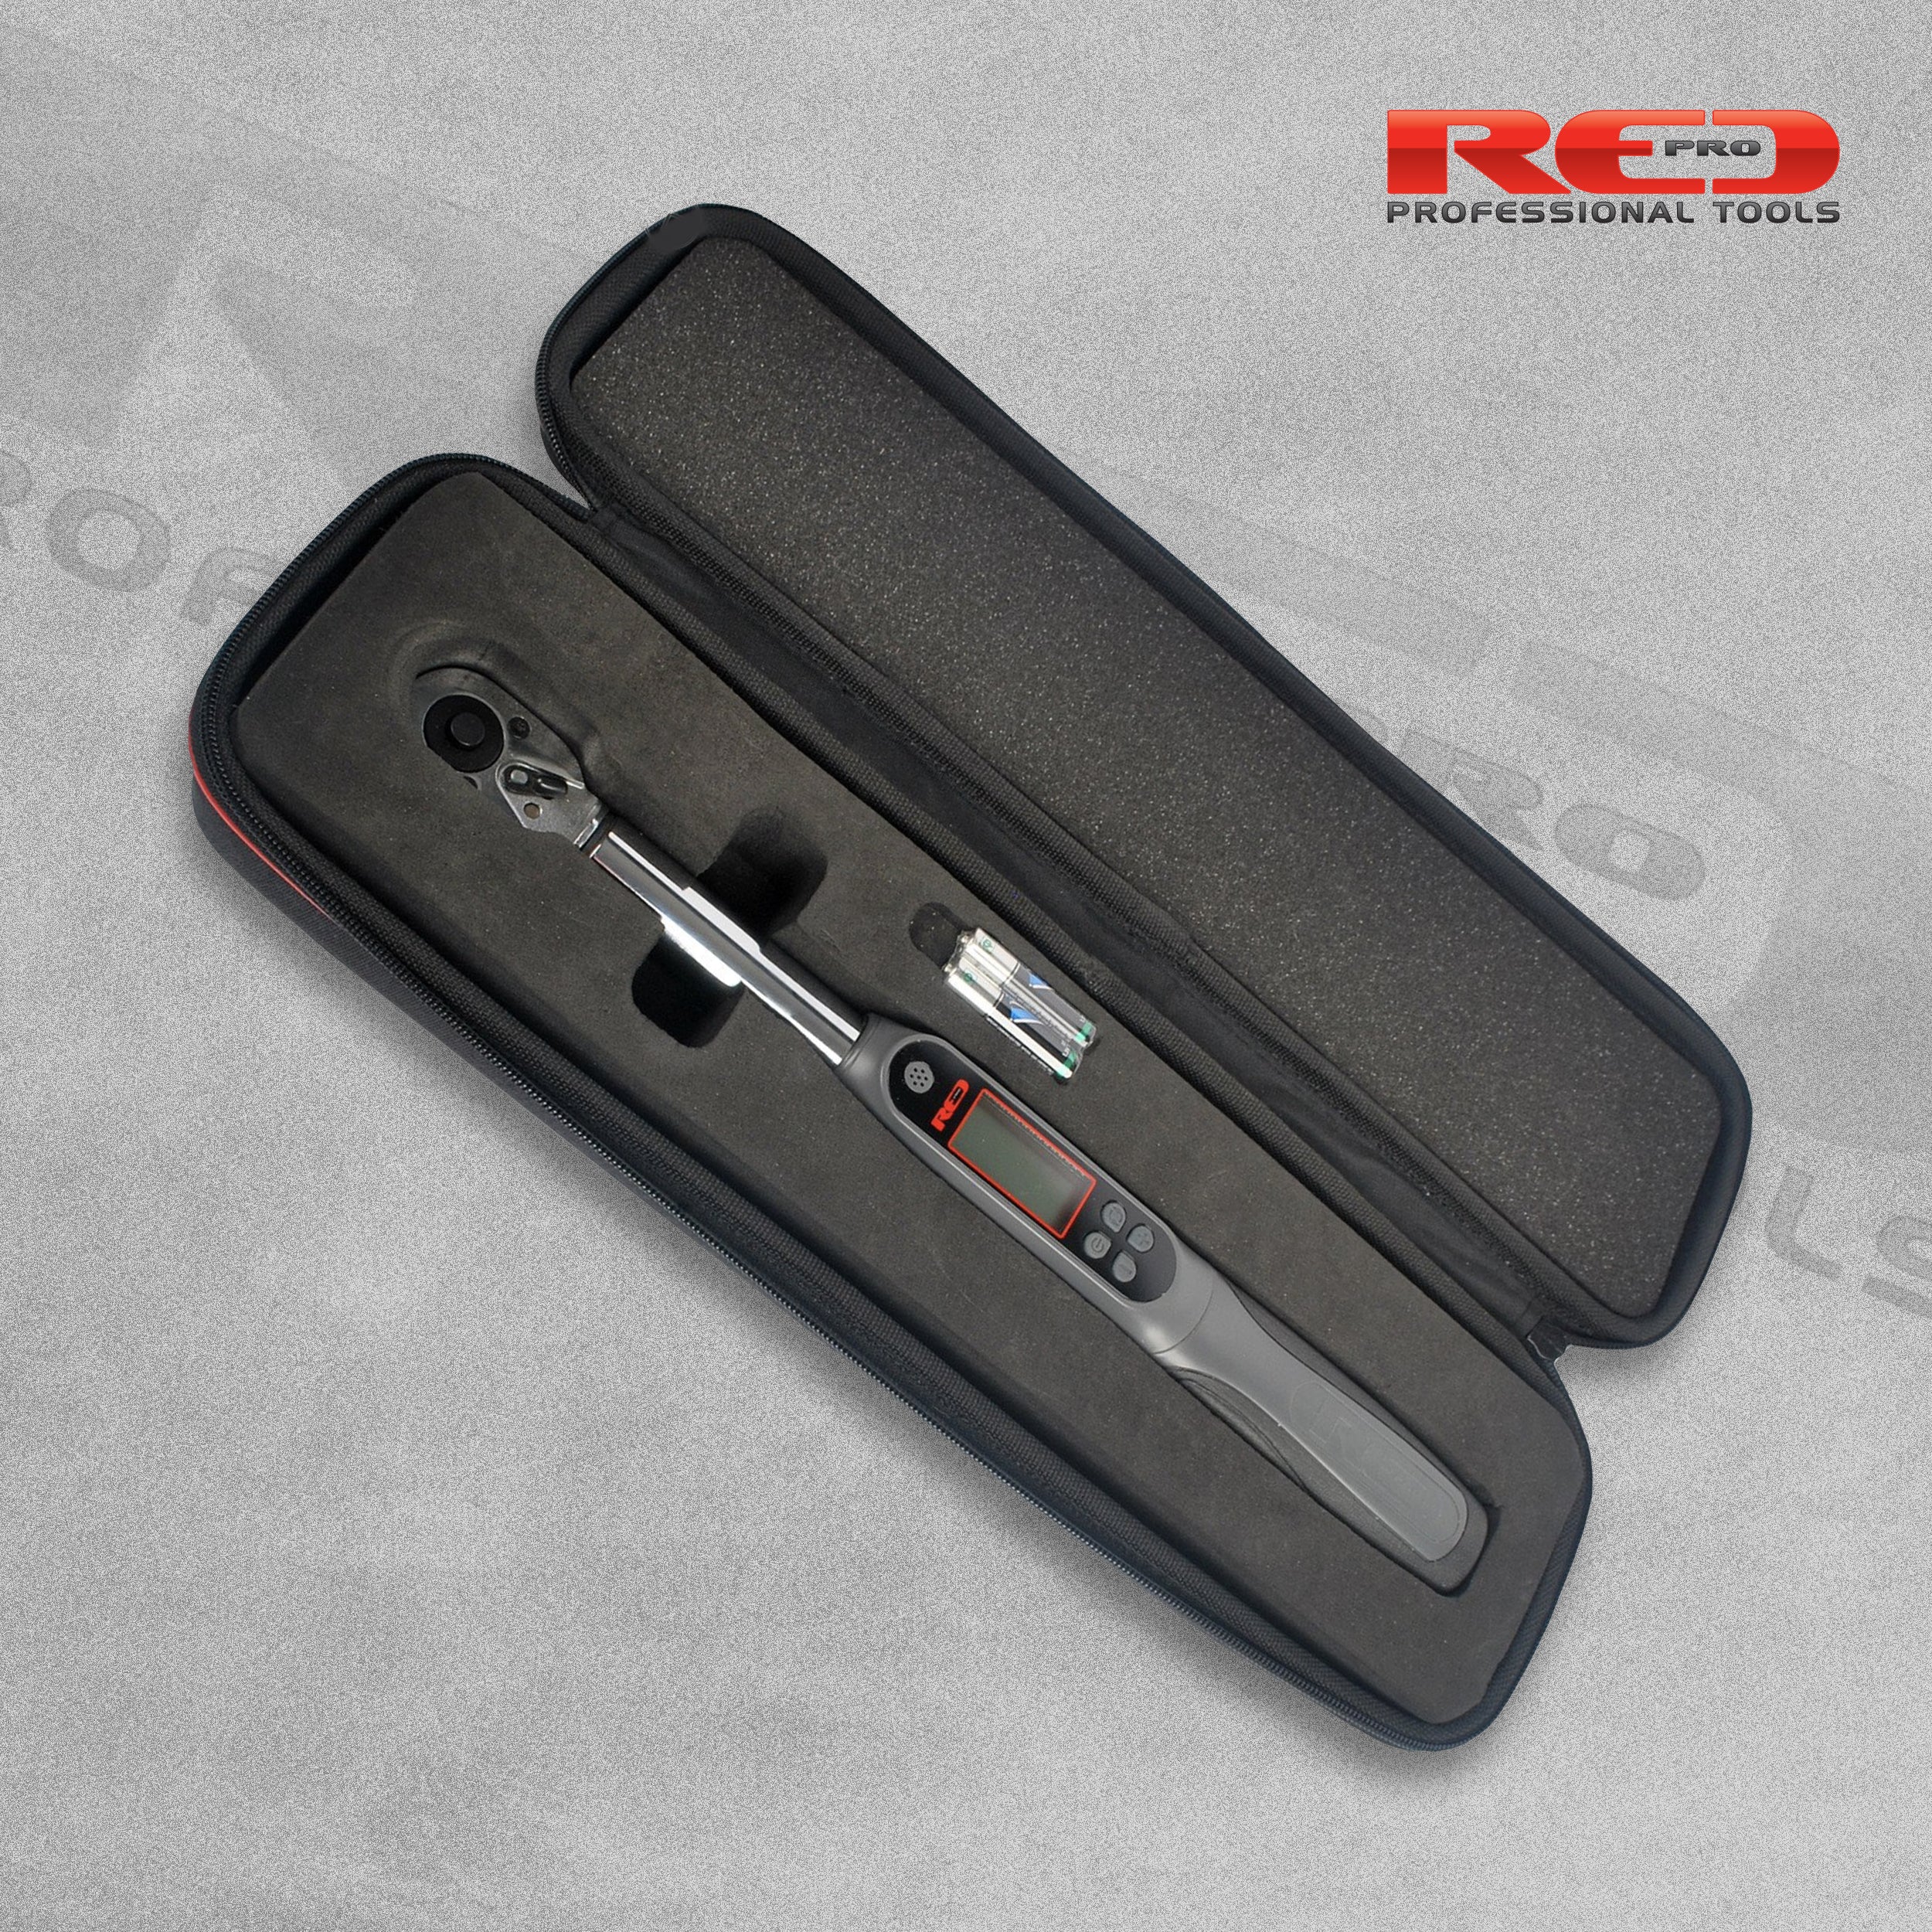 Red Pro Tools 3/8" Drive Digital Torque Wrench (370mm)